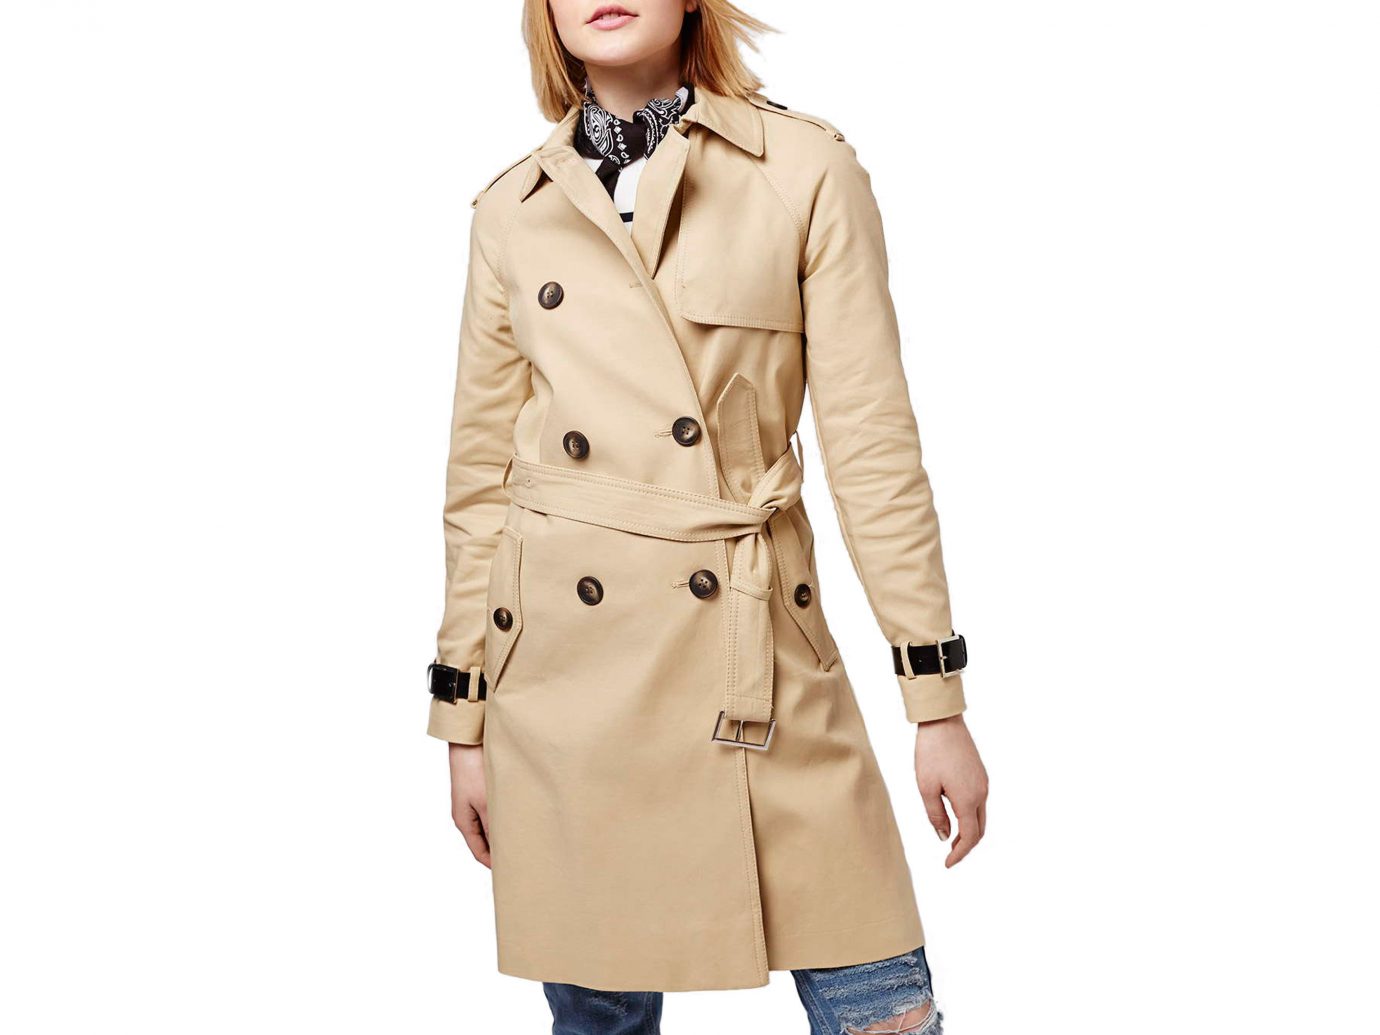 Style + Design clothing trench coat coat person wearing overcoat posing suit sleeve beige outerwear collar jacket dressed tan